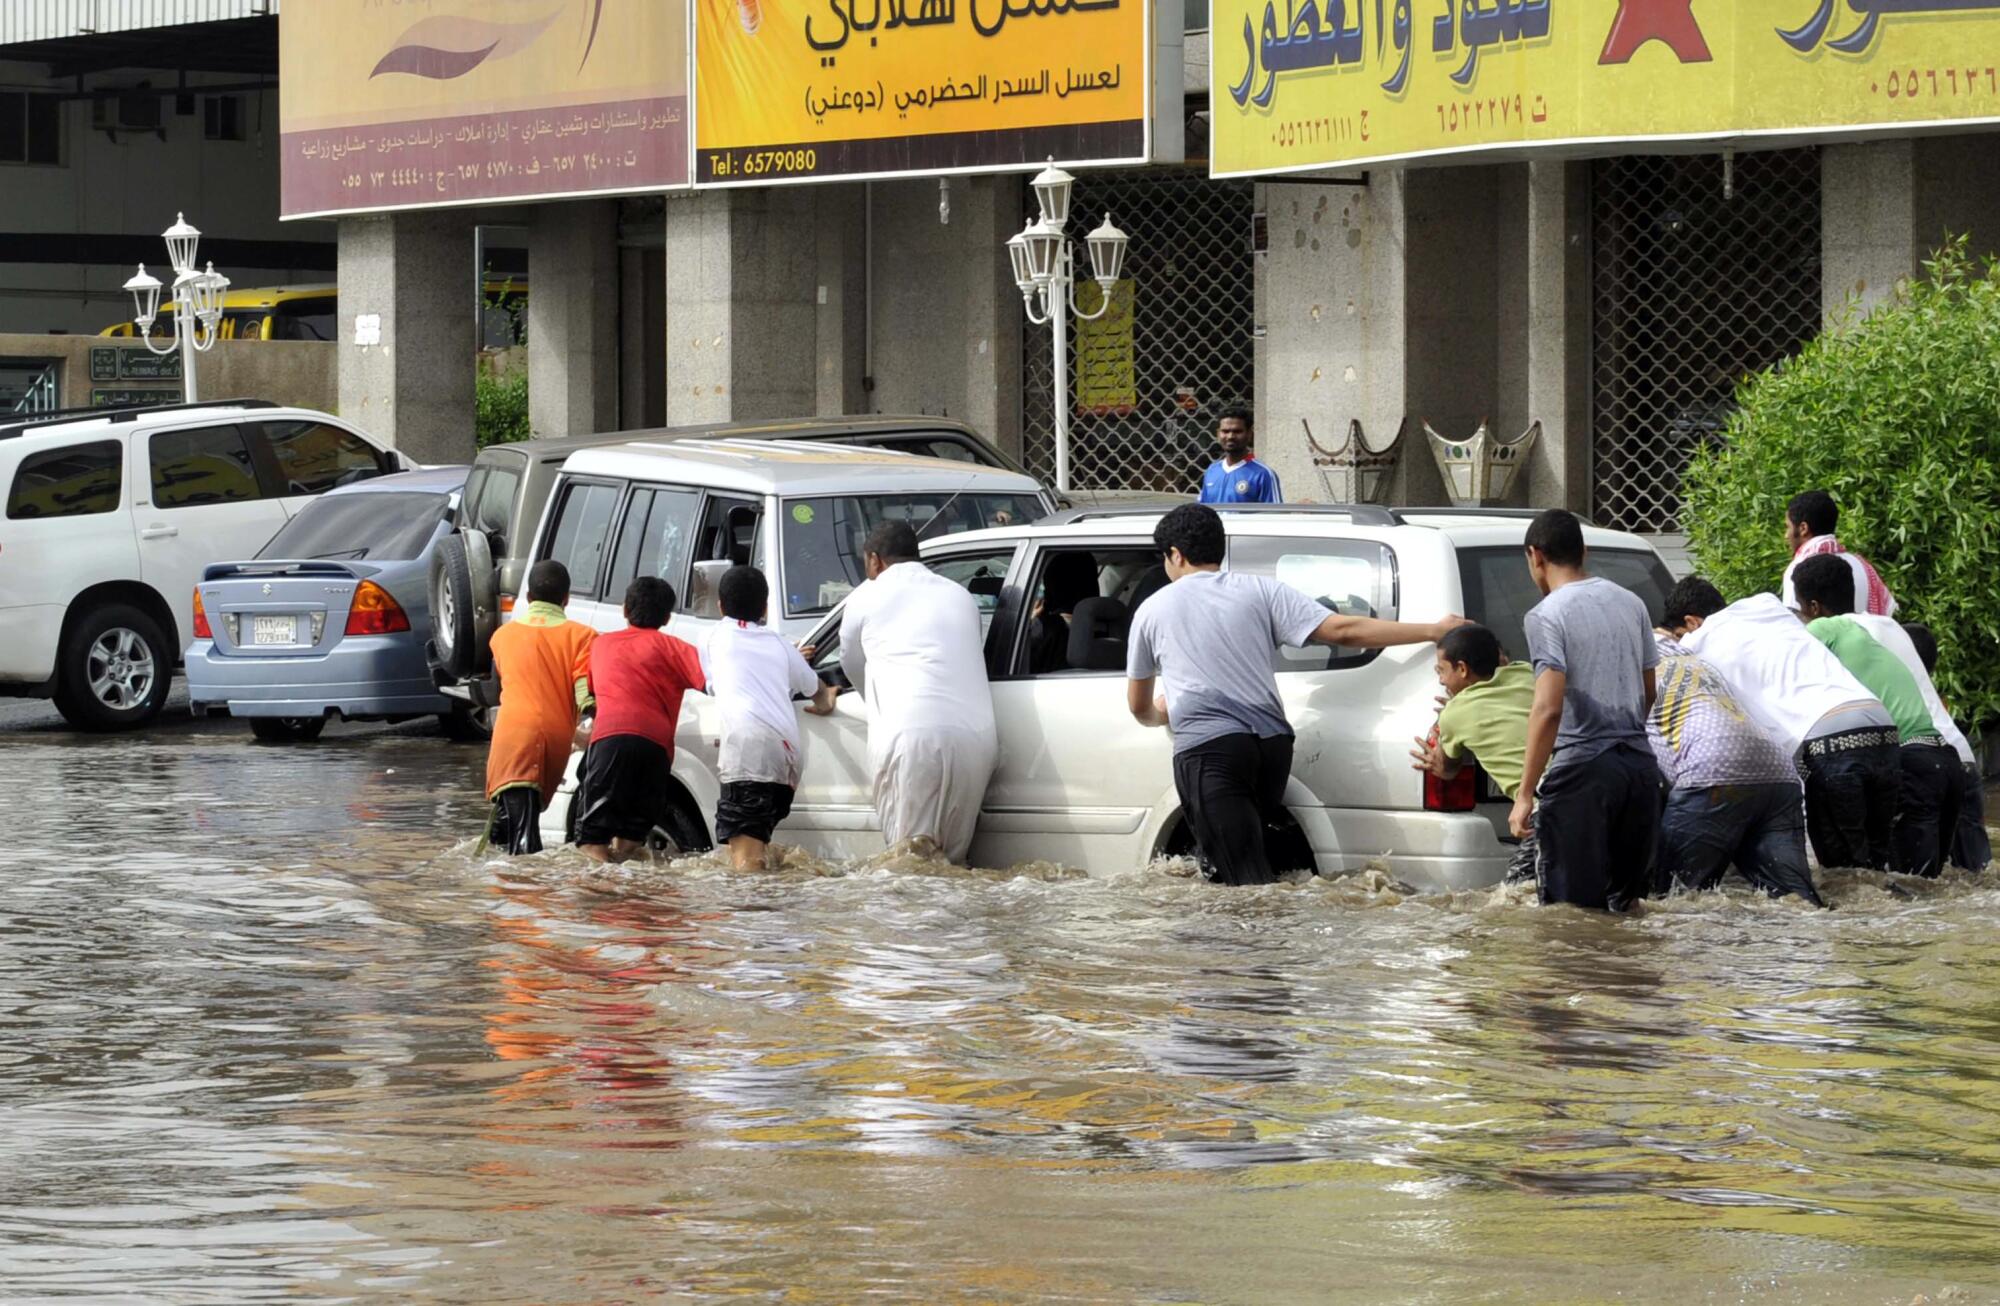 Men pushing a car stuck in a flooded street